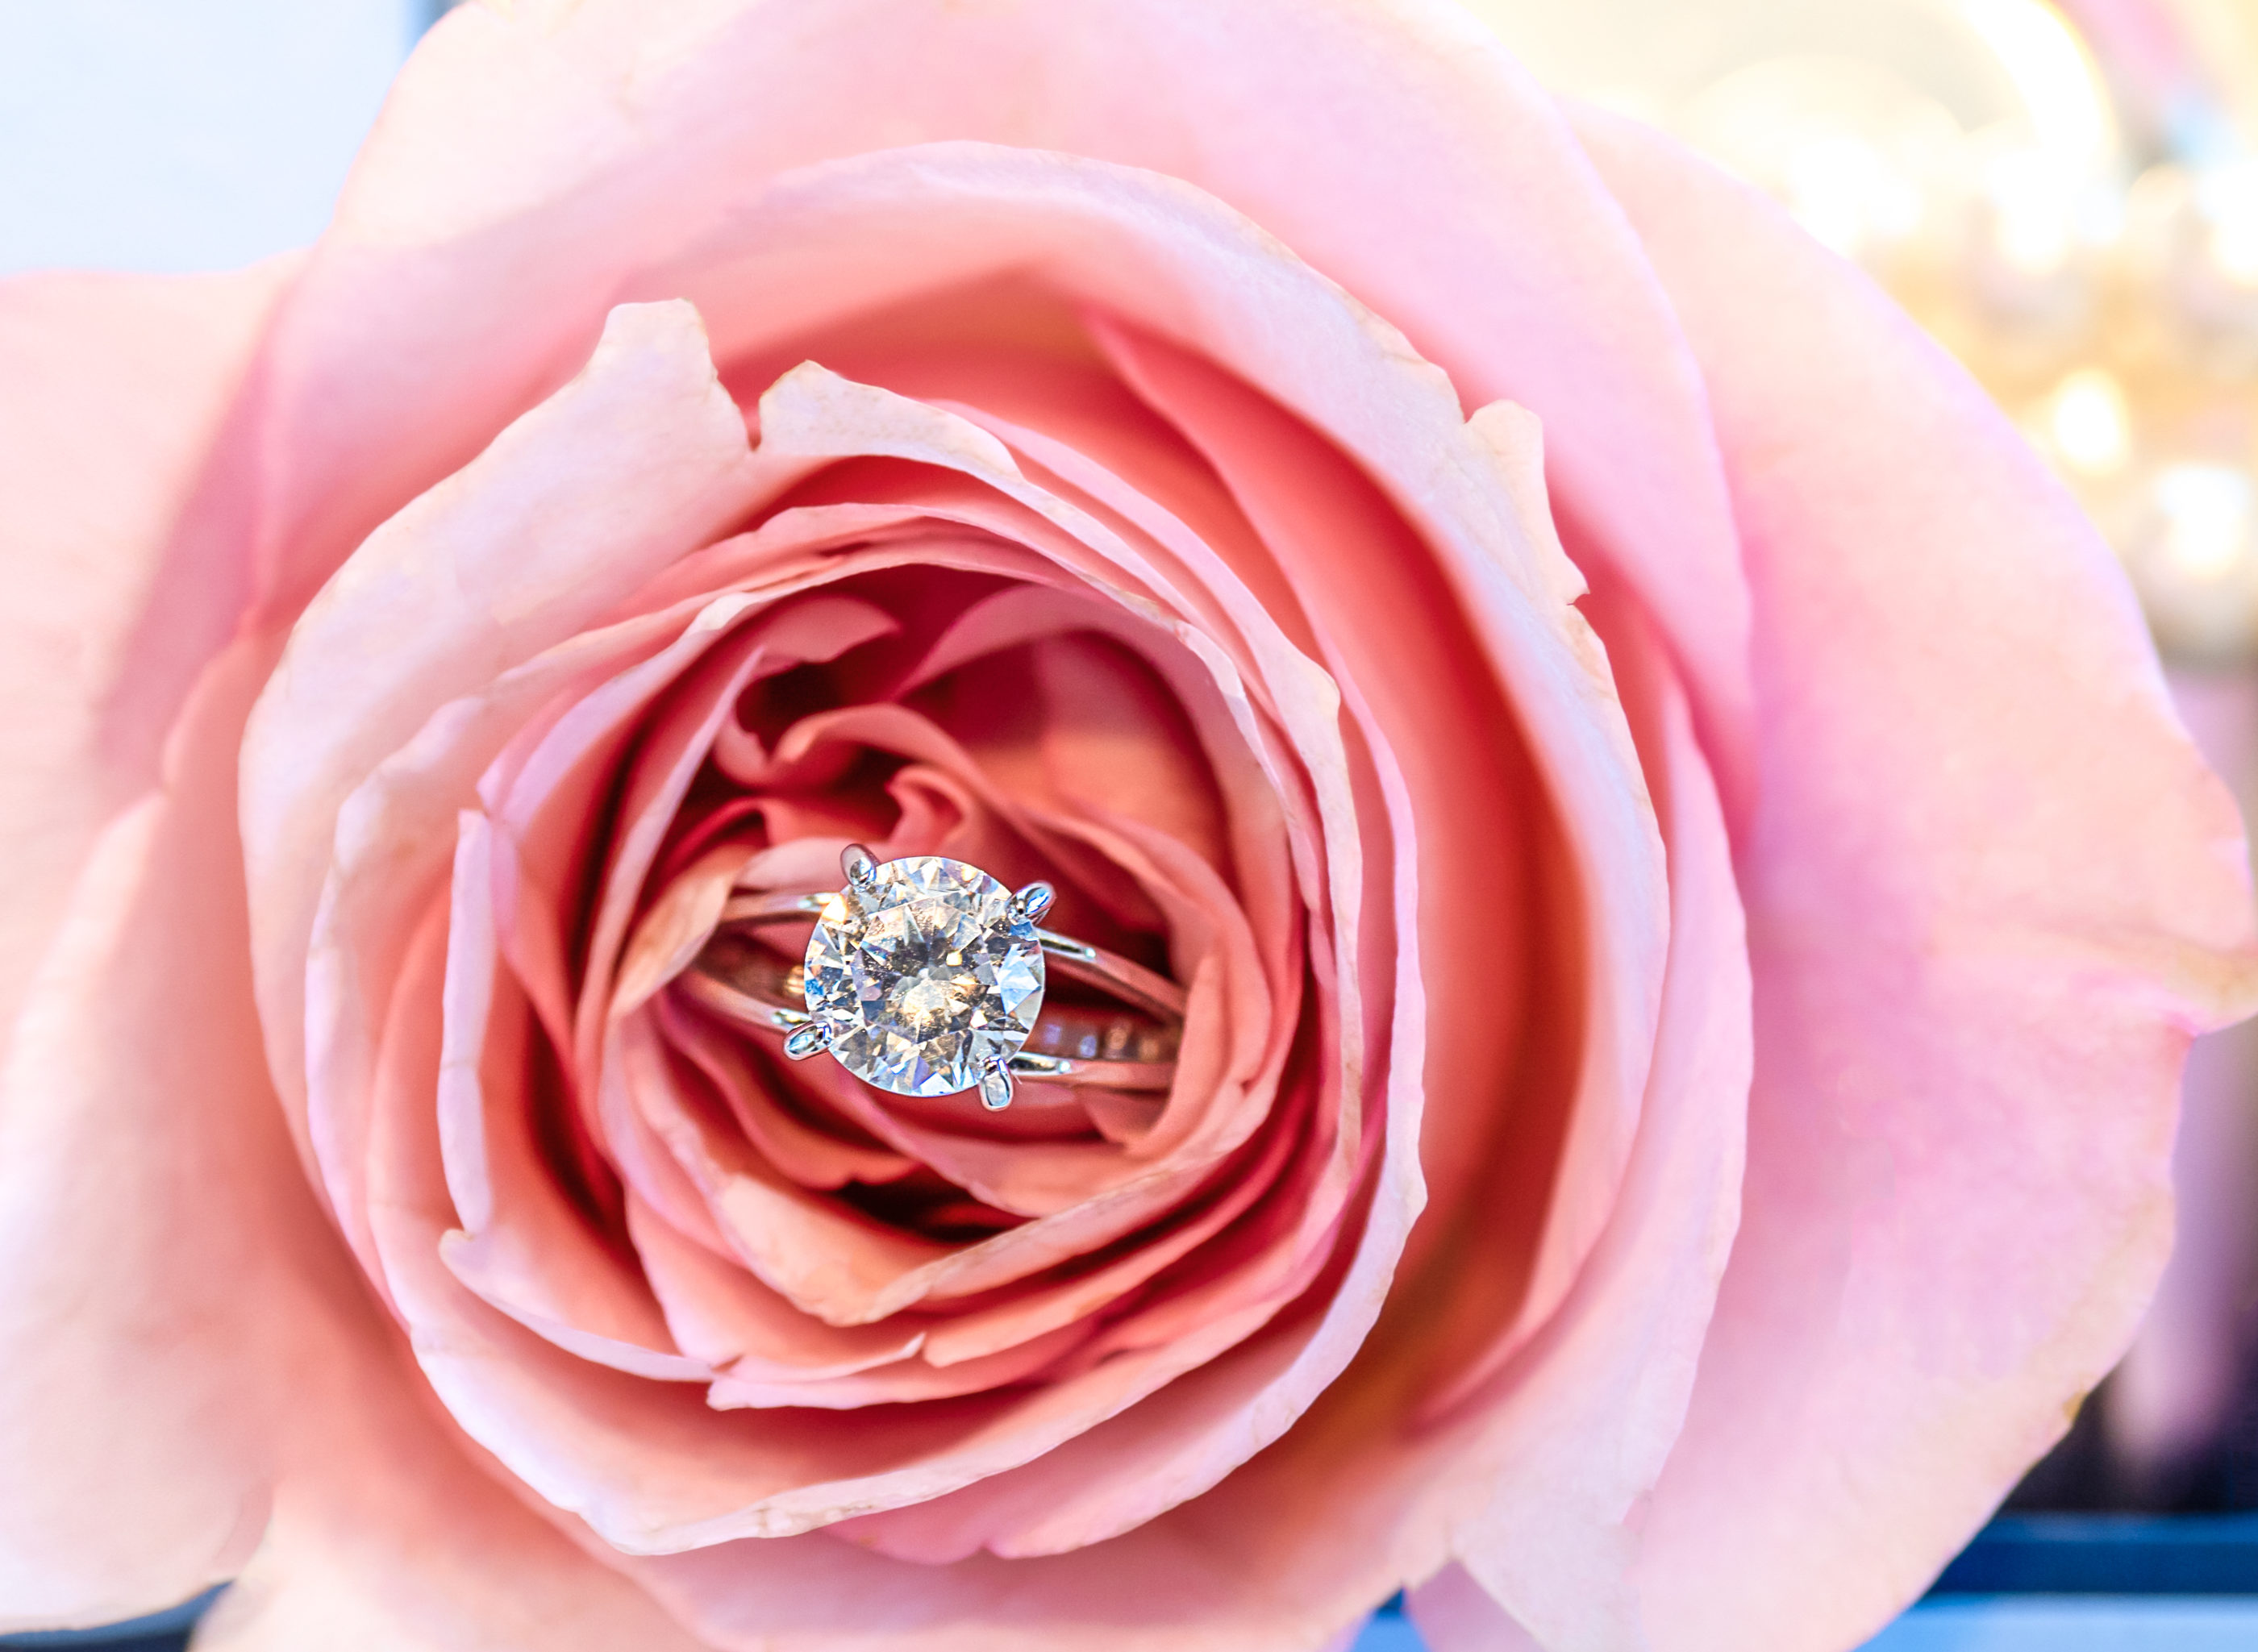 pink rose with large diamond engagement ring in center